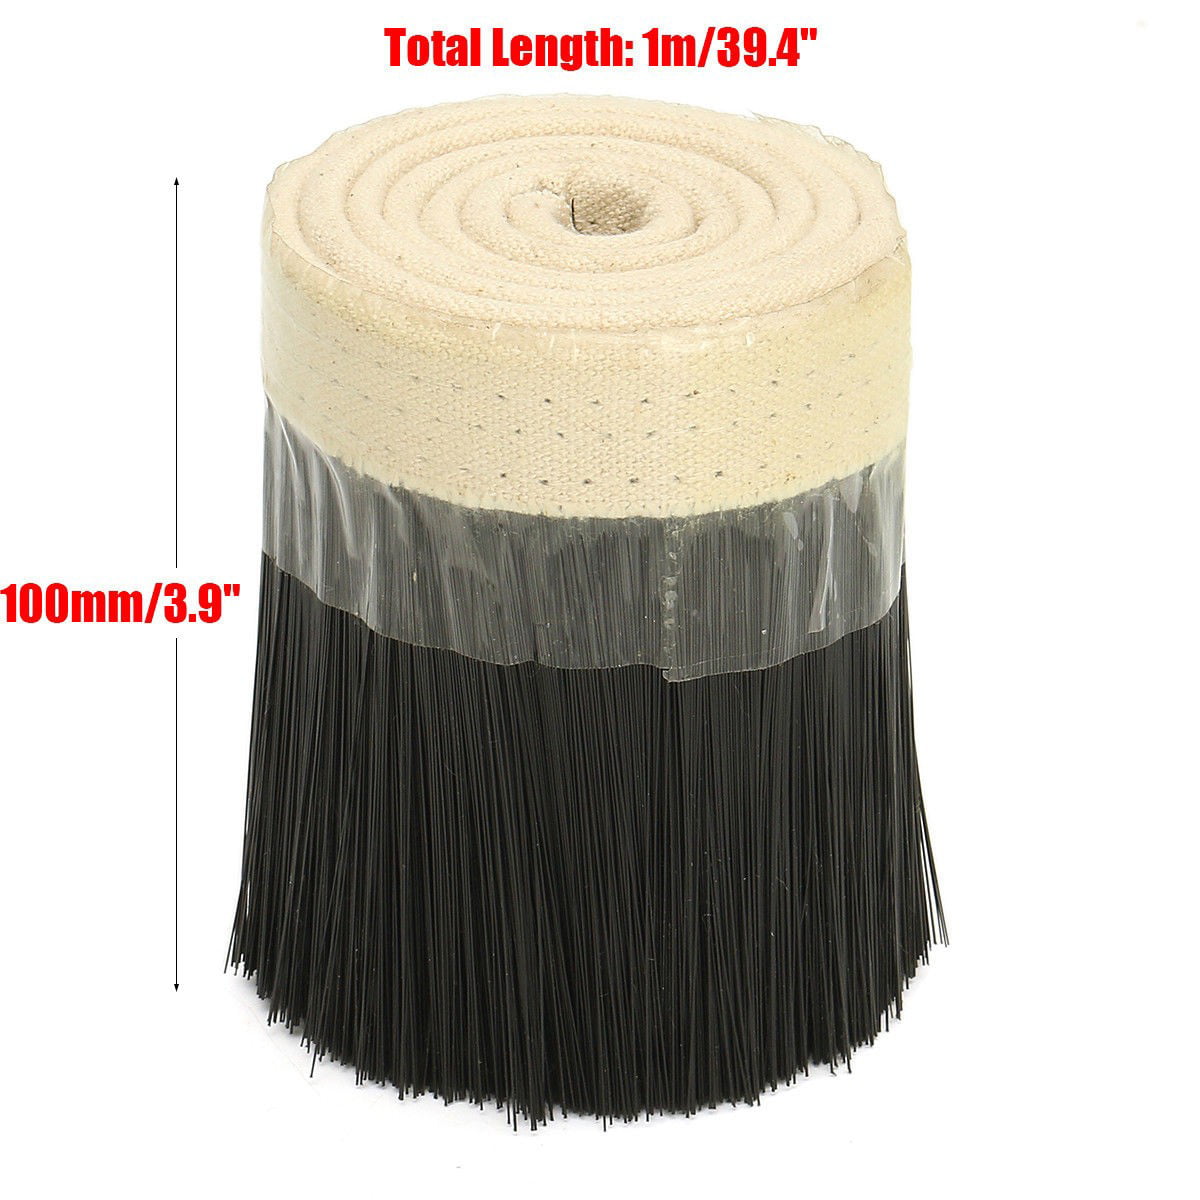 70/100mm Nylon Brush Vacuum Cleaner Engraving Dust Machine Cover For CNC Router 